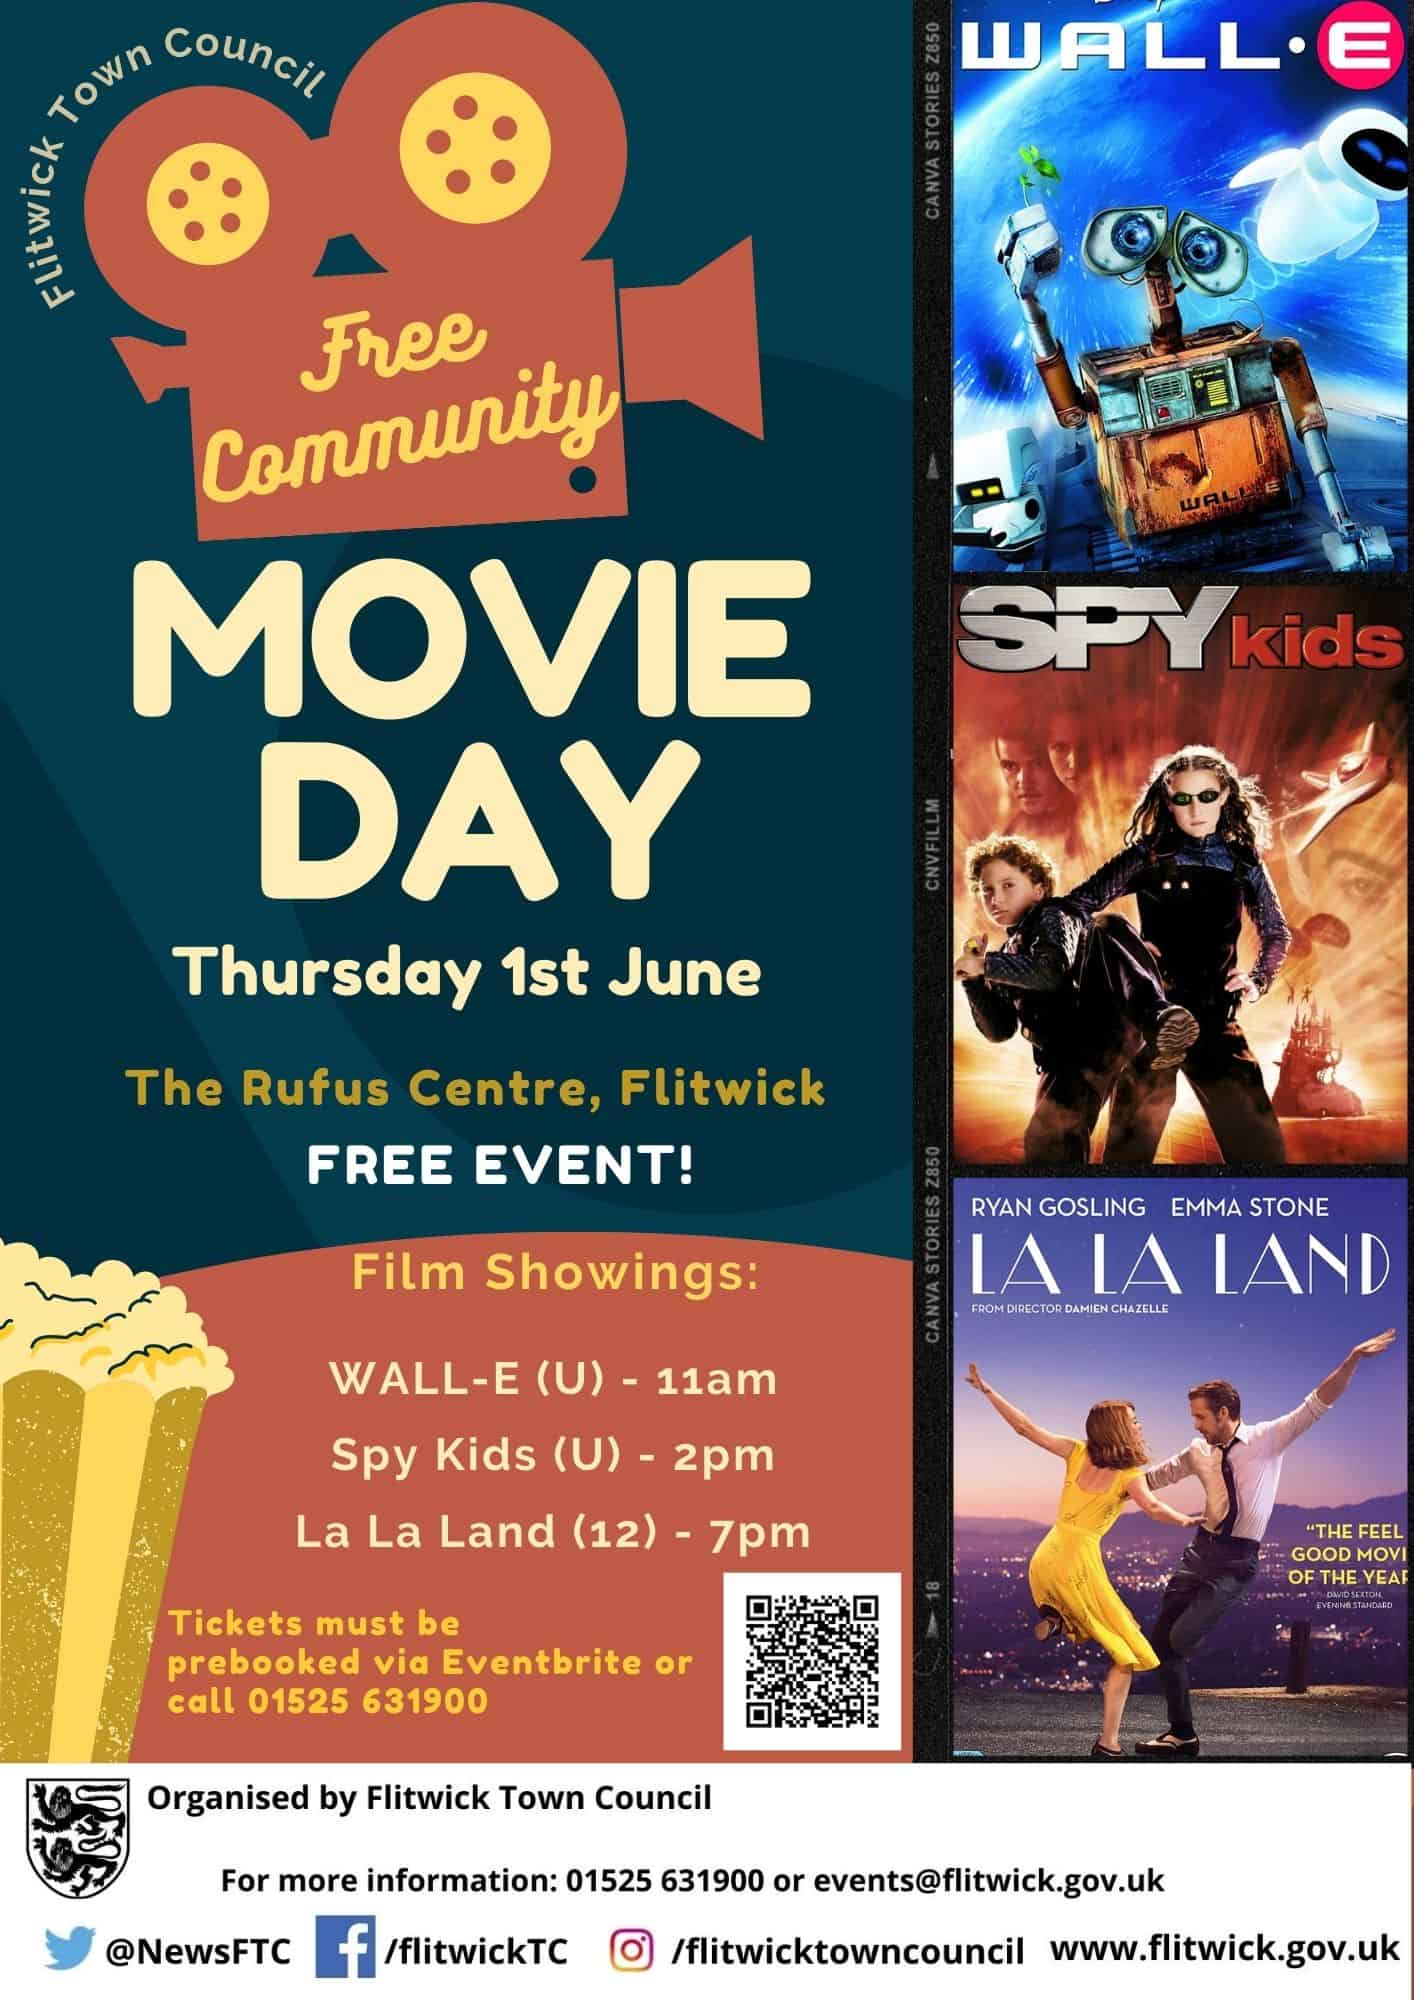 Poster advertising movie day